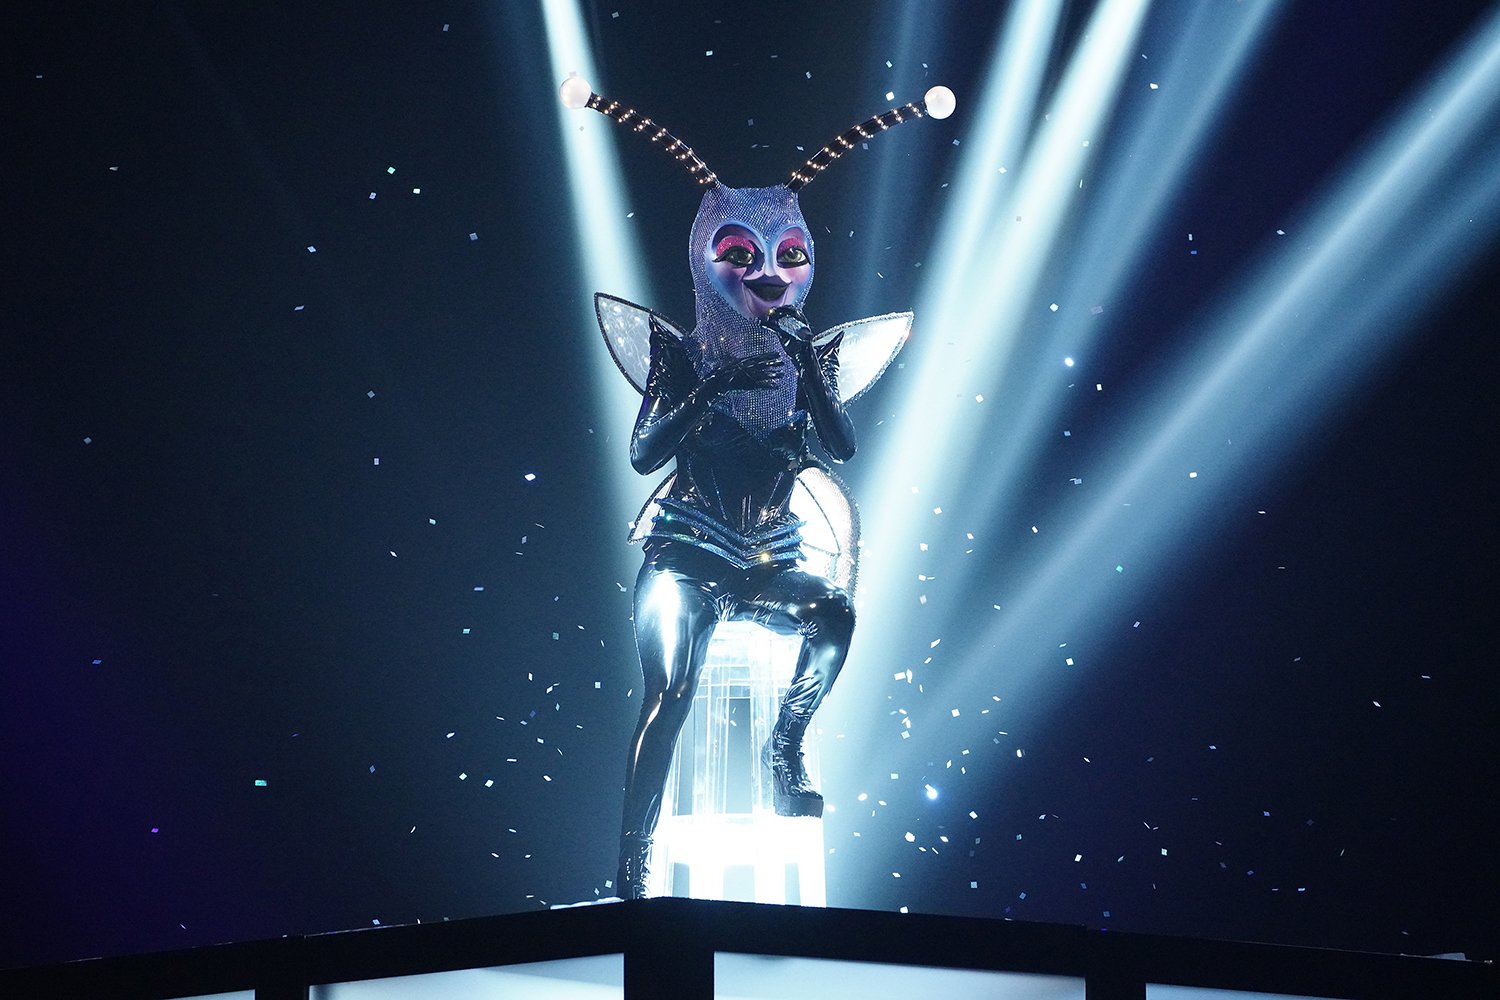 Firefly performs without lip-syncing during season 7 of The Masked Singer